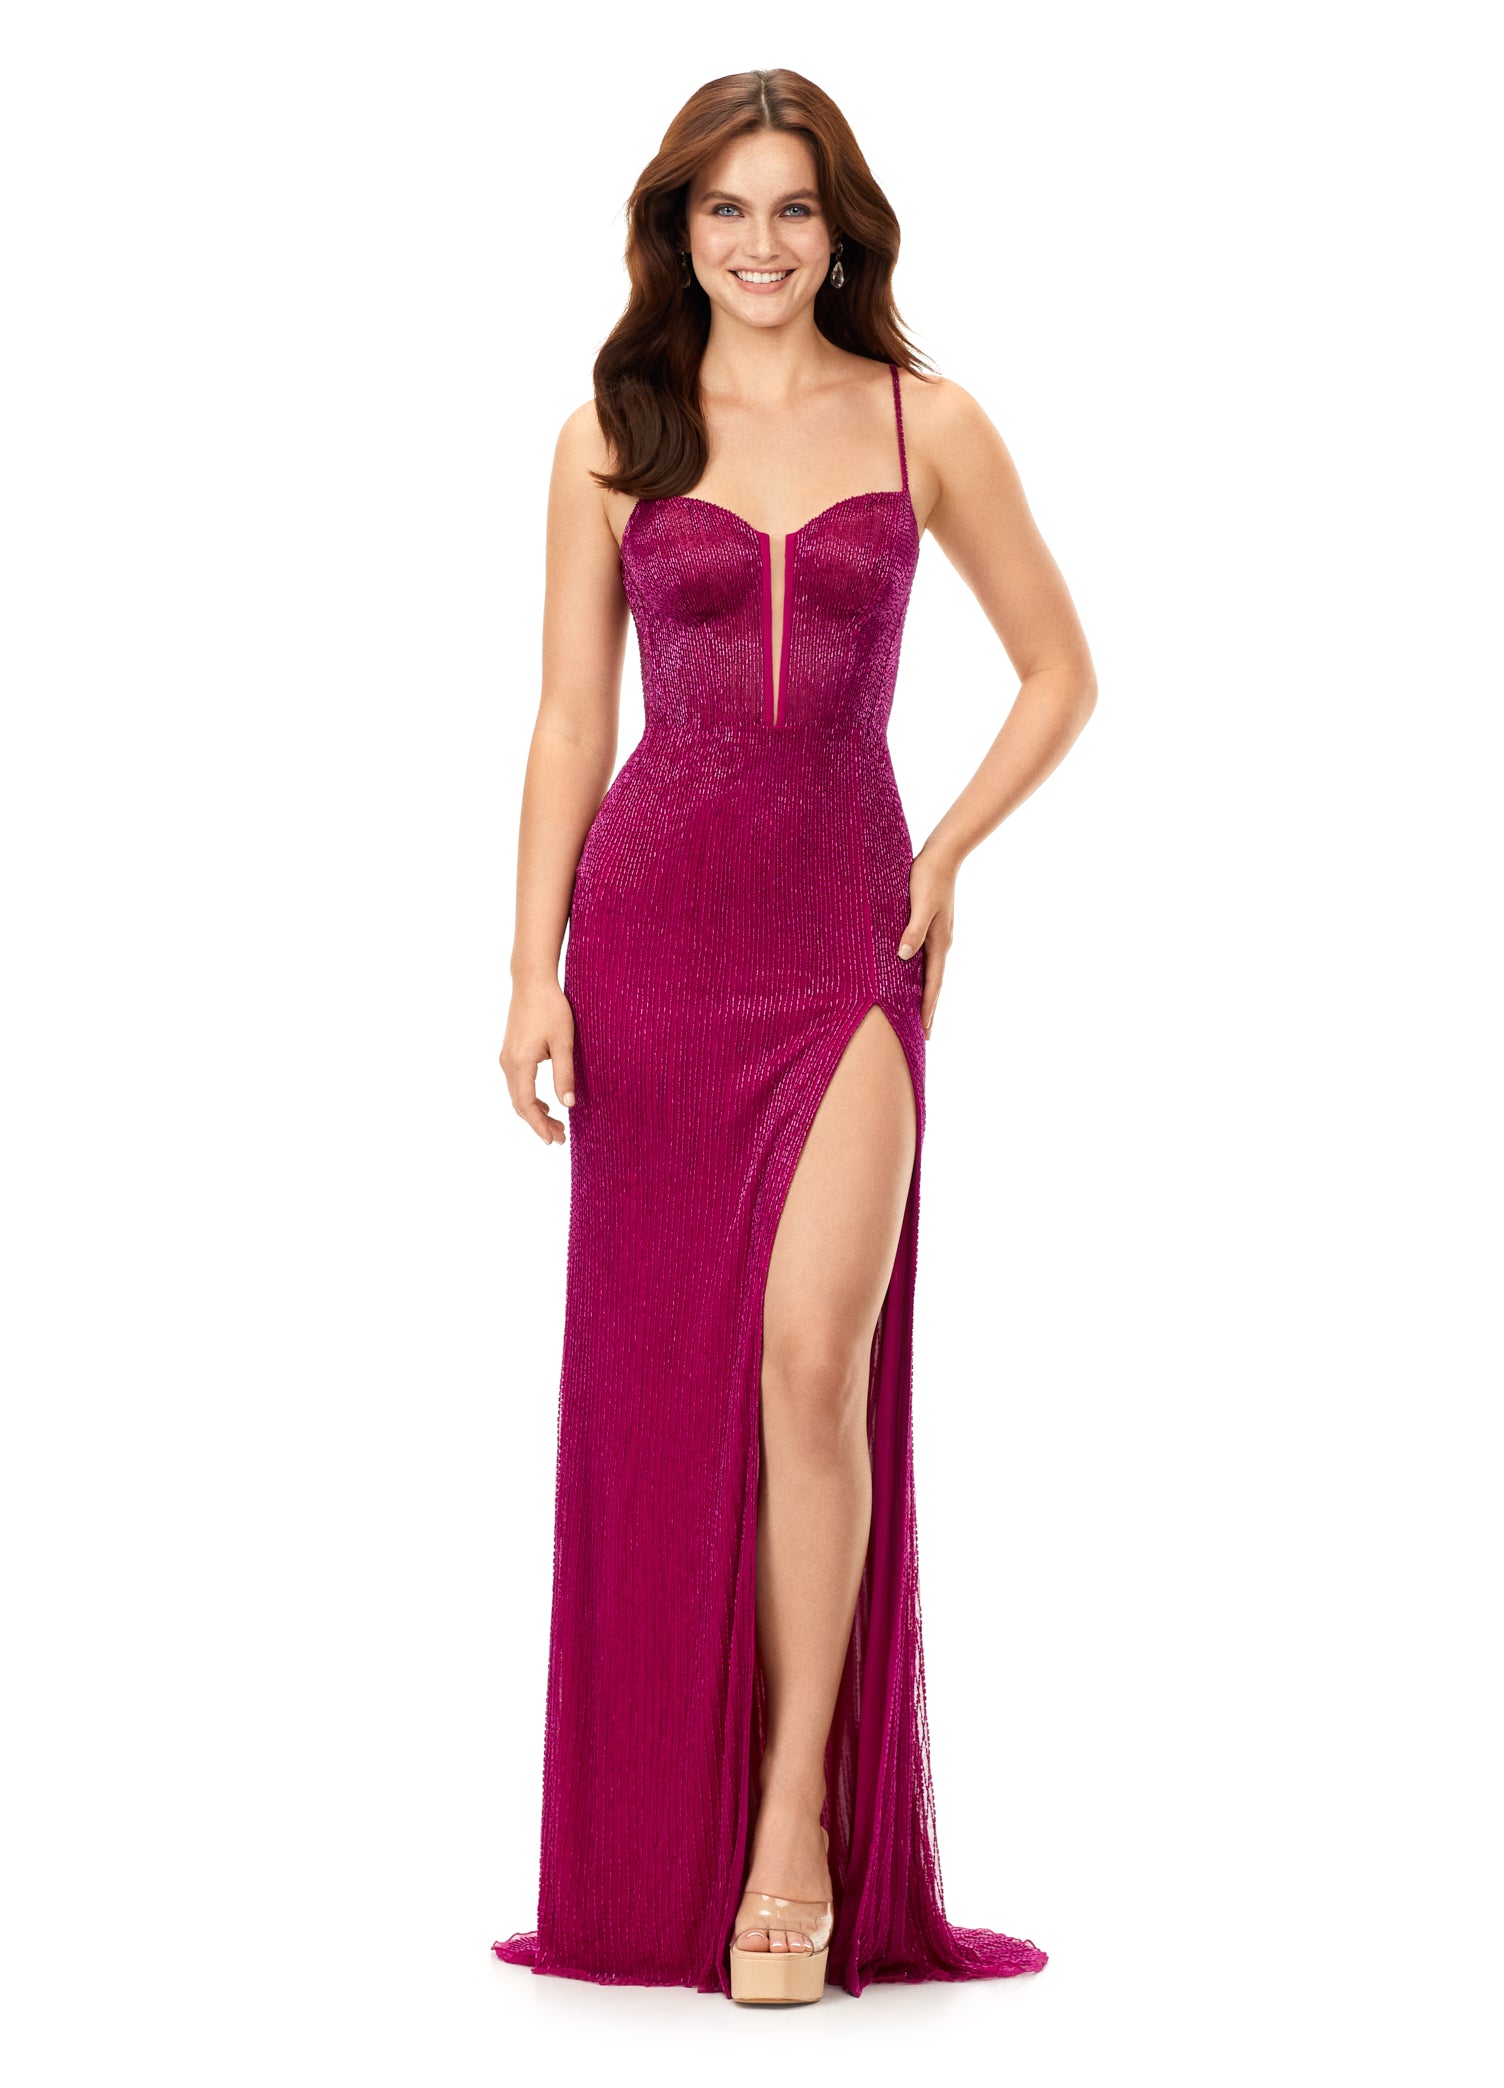 Ashley Lauren 11369 This Raspberry liquid beaded style features an exposed bustier that is sure to accentuate your curves. The look is complete with sweep train and left leg slit.